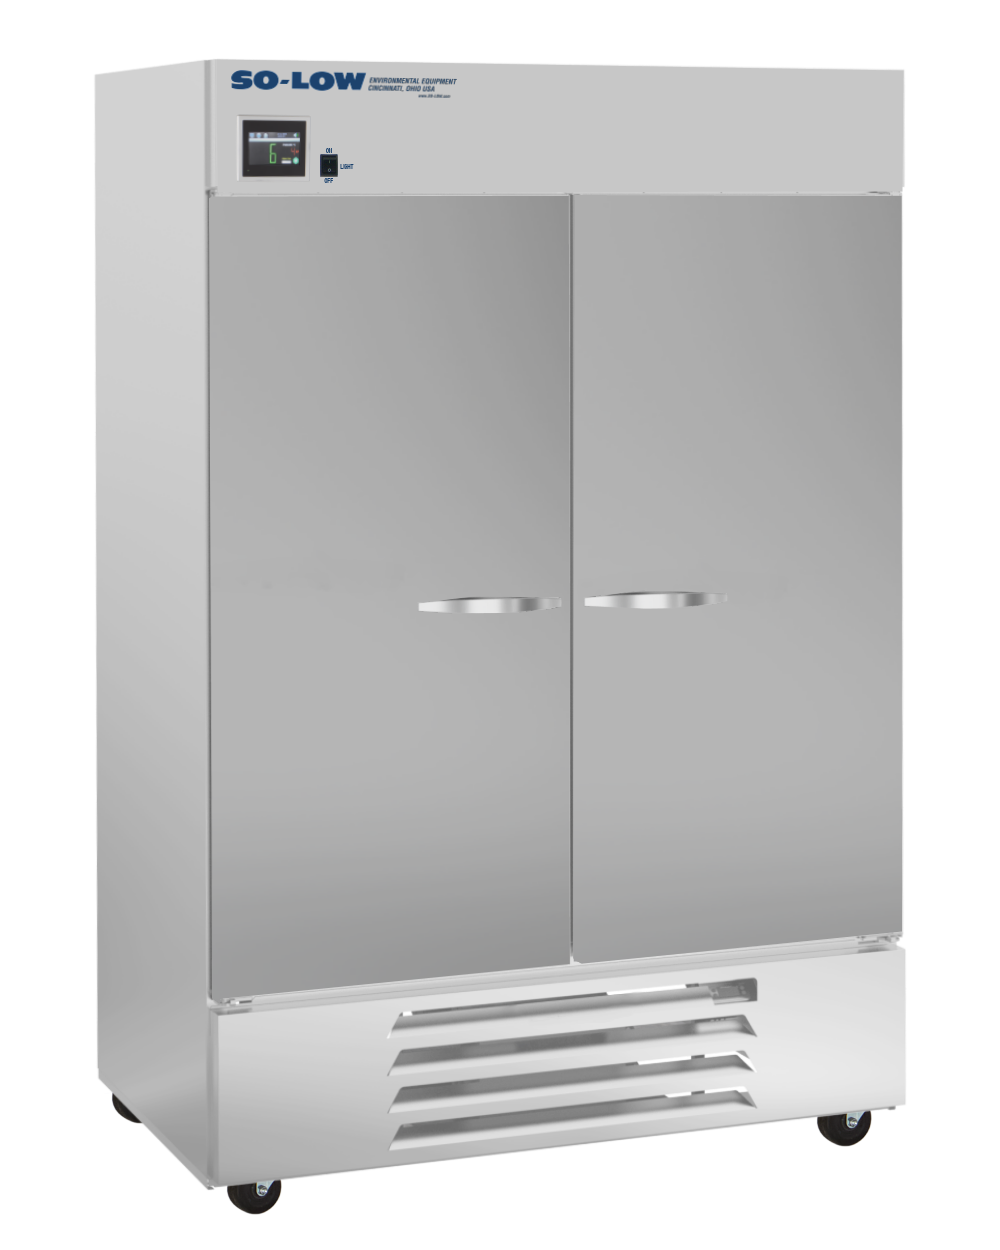 So-Low 2ºC to 8ºC, 49 cu. ft., two solid doors, Cycle defrost, 115v